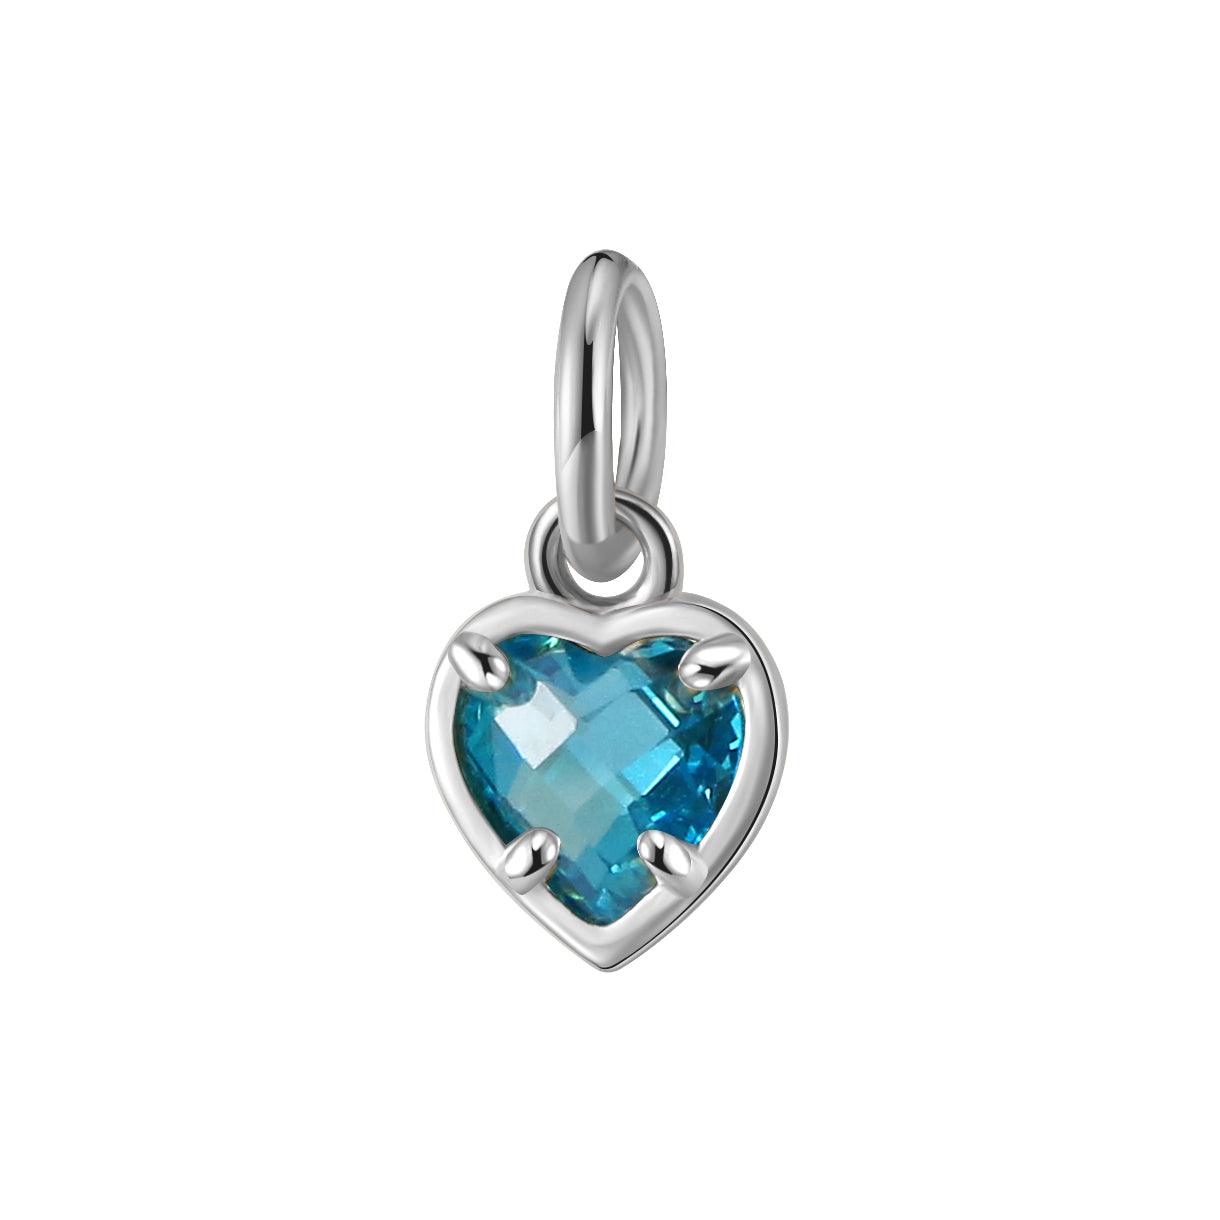 Birthstone Charm - Findings & Connections